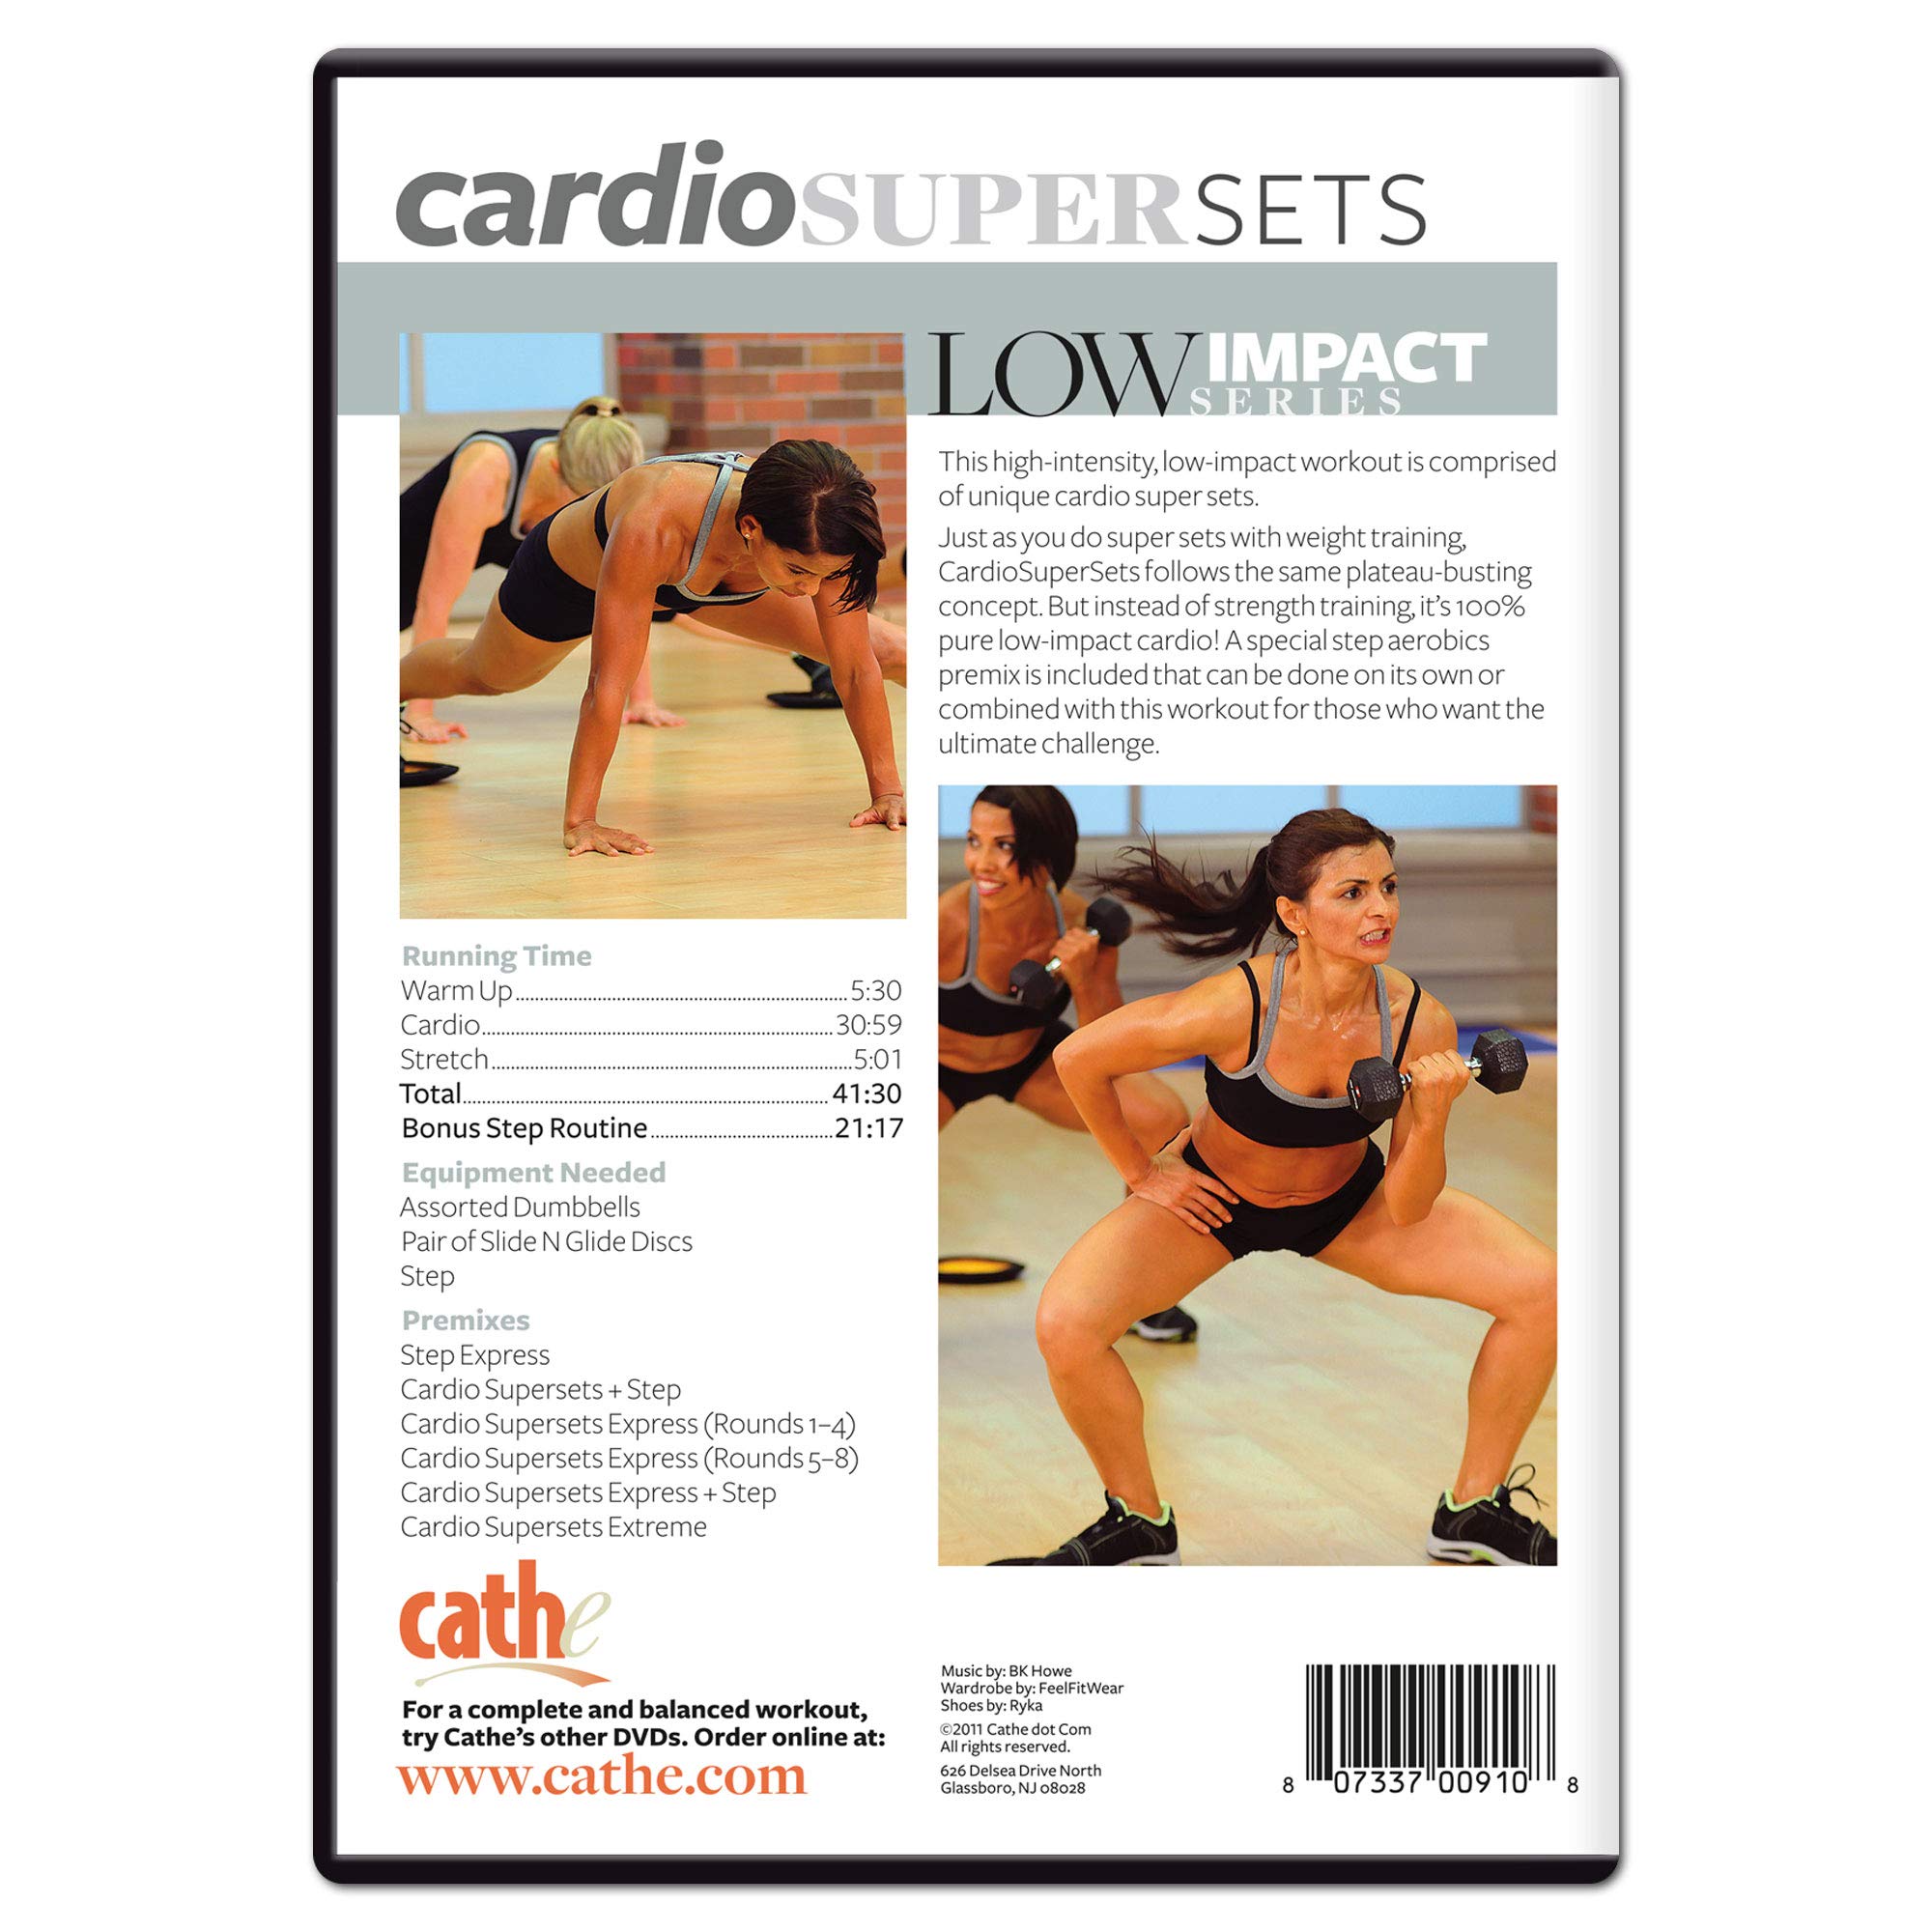 Cathe Friedrich Cardio Supersets Low Impact Exercise DVD For Women - Use for Cardio, HIIT Workout Training, Weight Loss, and Fat Burning